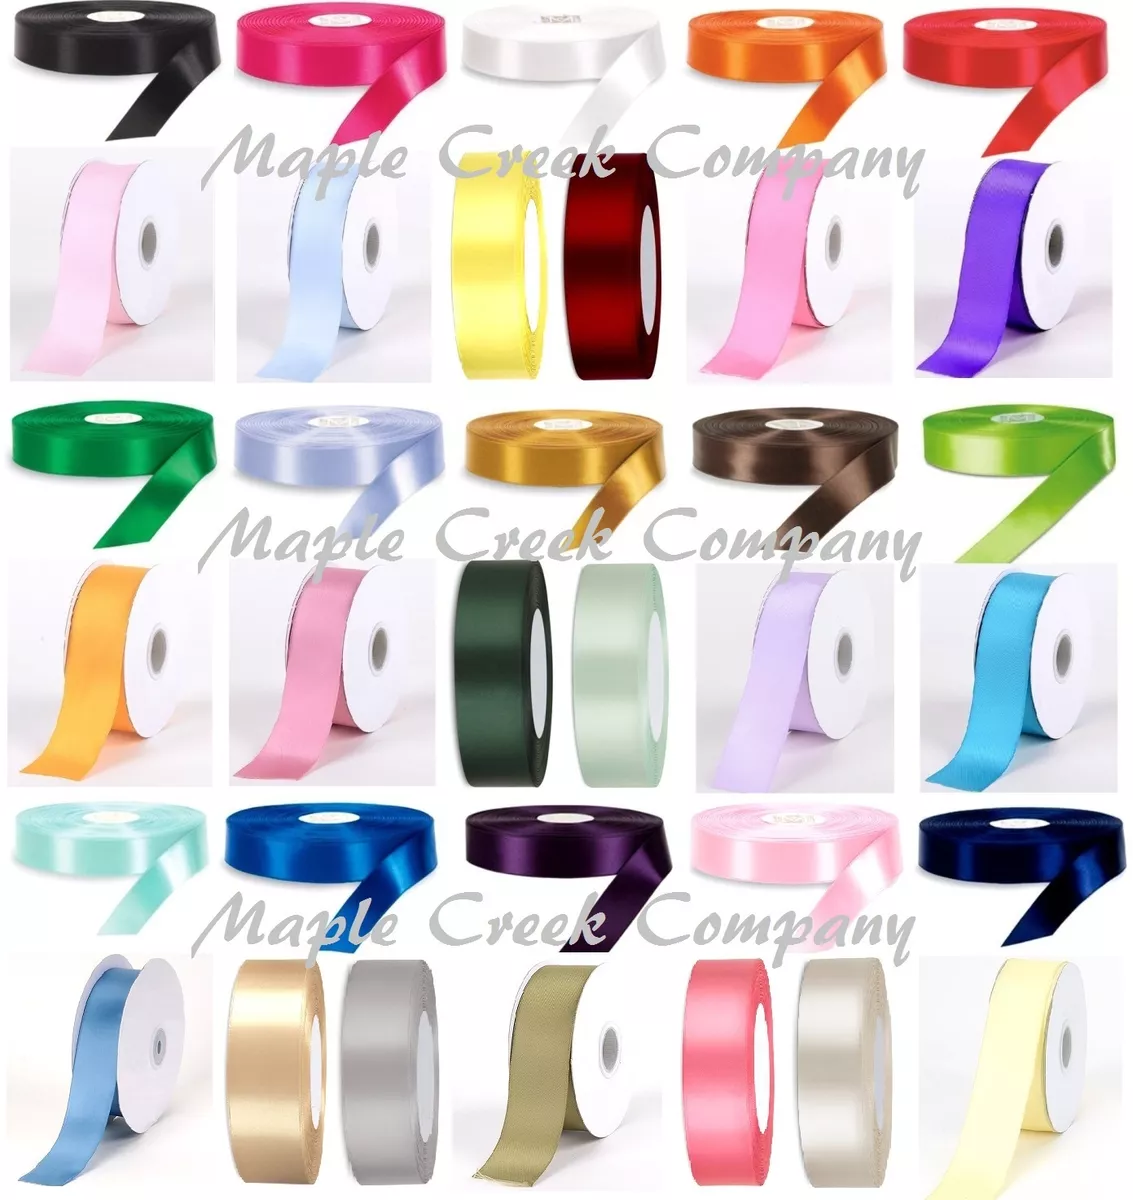 Double Face Satin Ribbon 1 1/2 inch x 5 yards (15 feet of ribbon) 34 COLORS